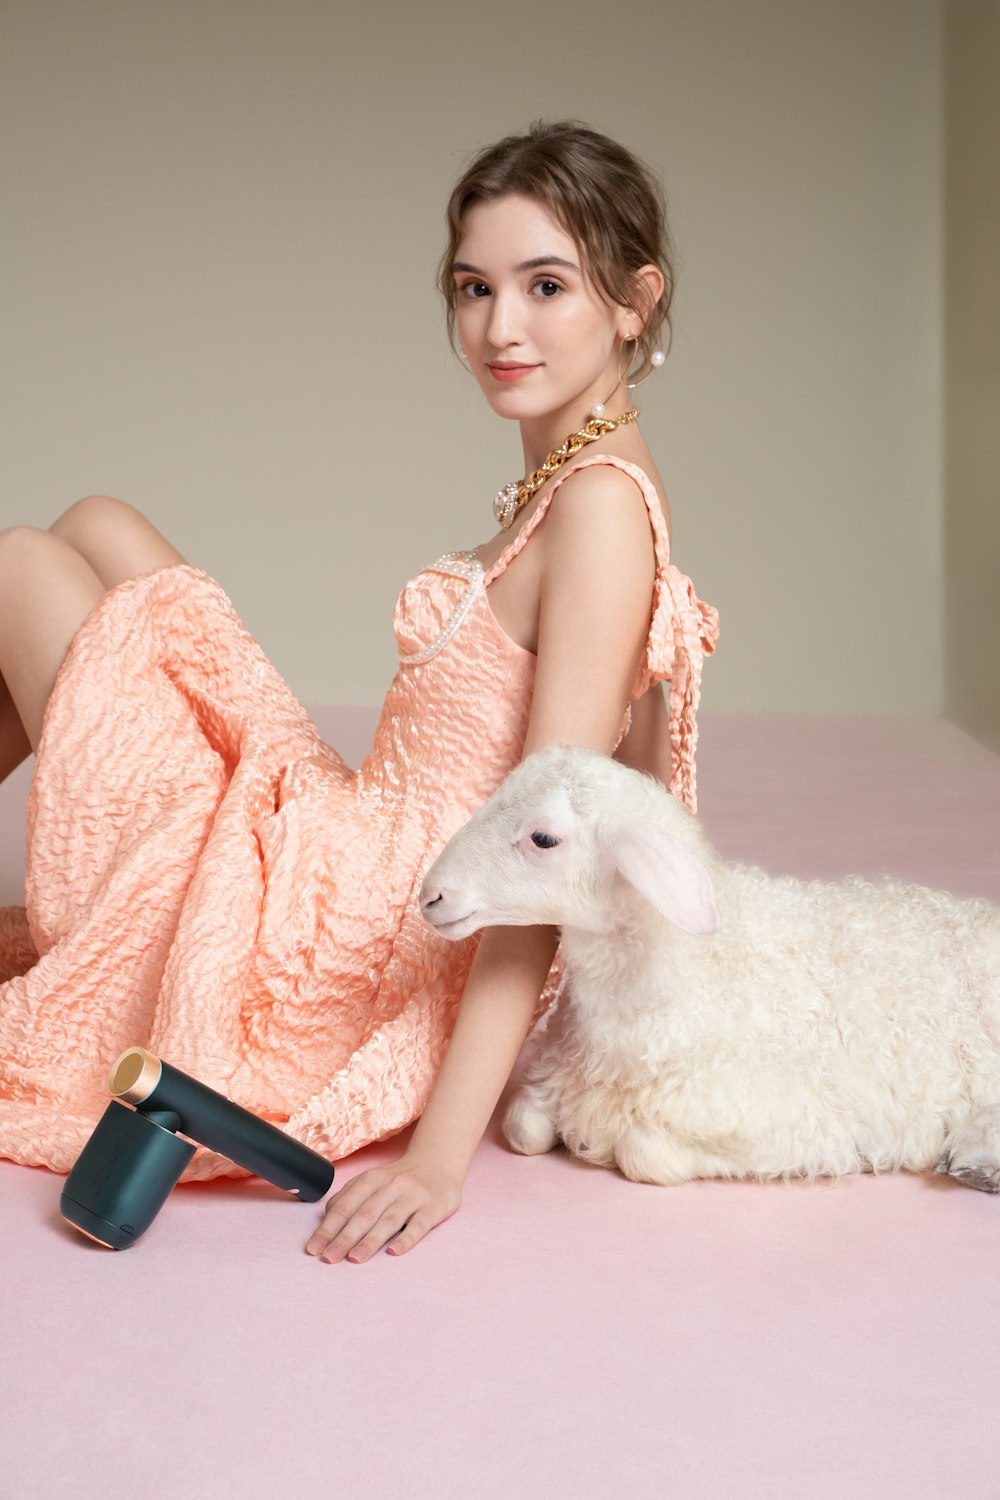 a woman sitting on a bed next to a sheep